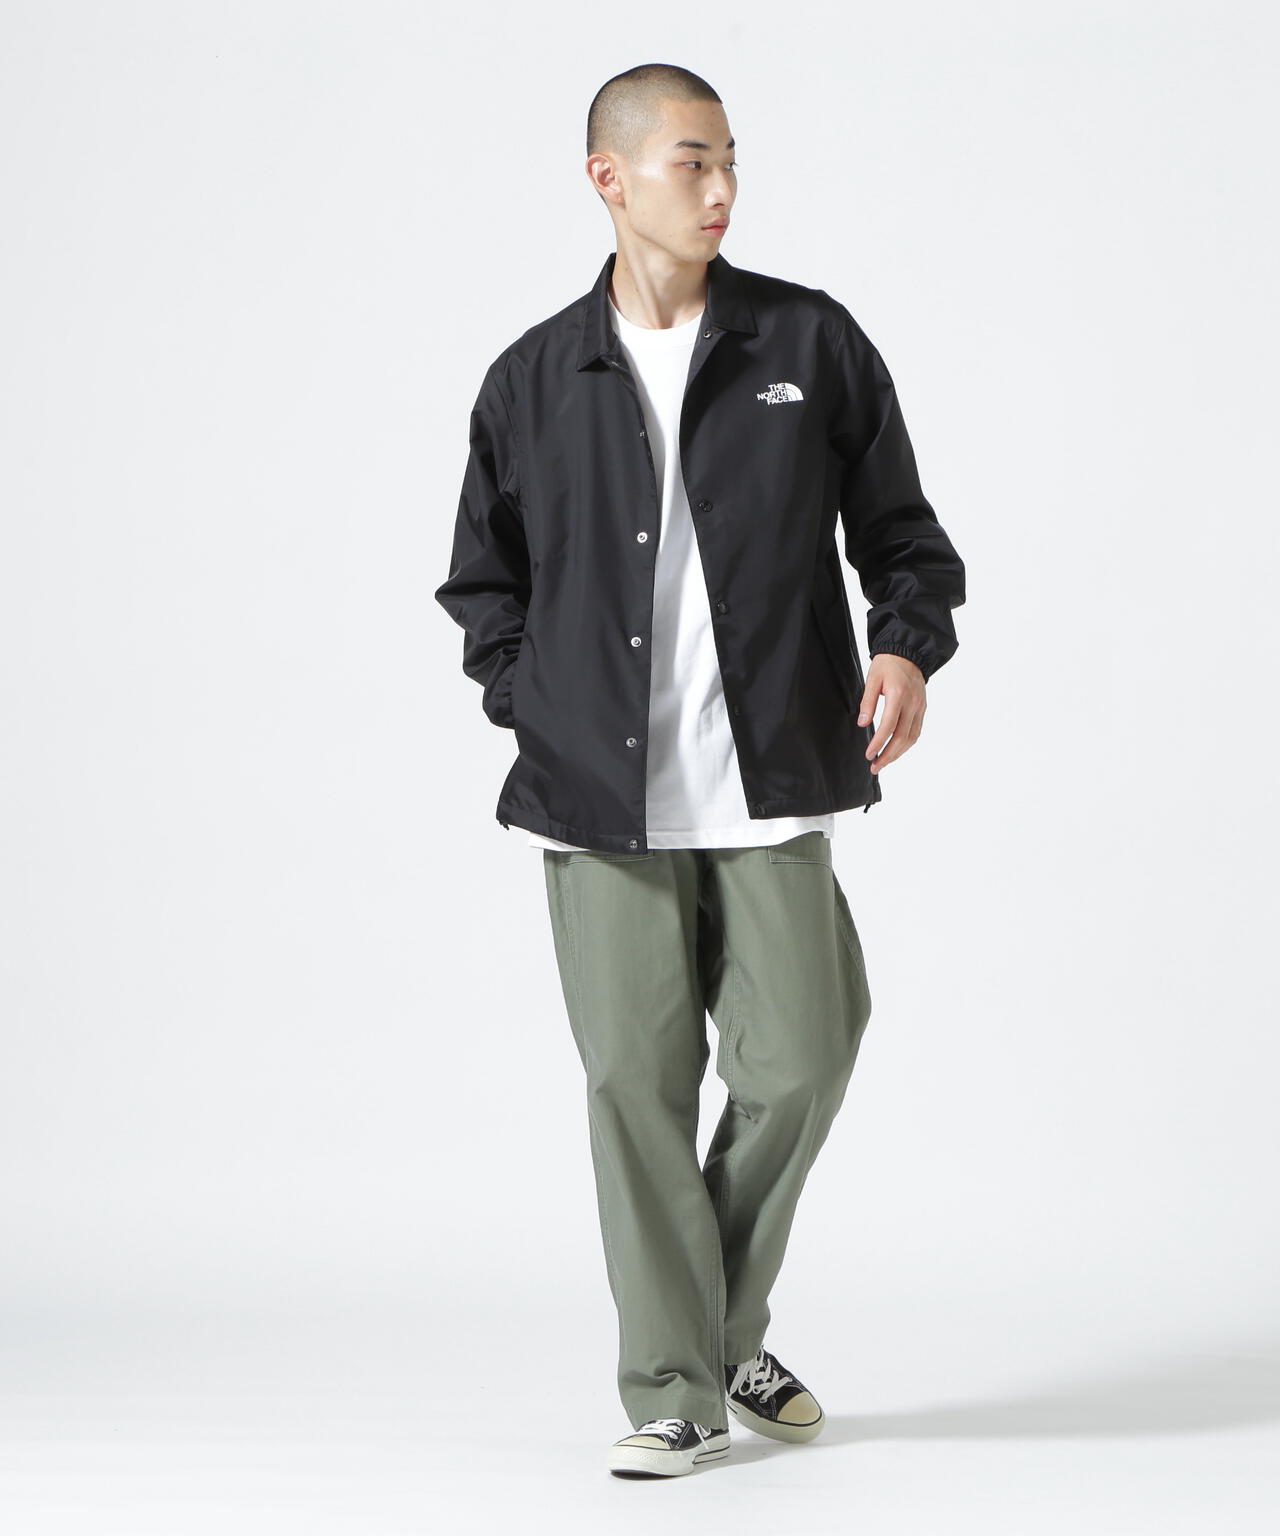 THE NORTH FACE / NEVER STOP ING The Coach Jacket | B'2nd ( ビー 